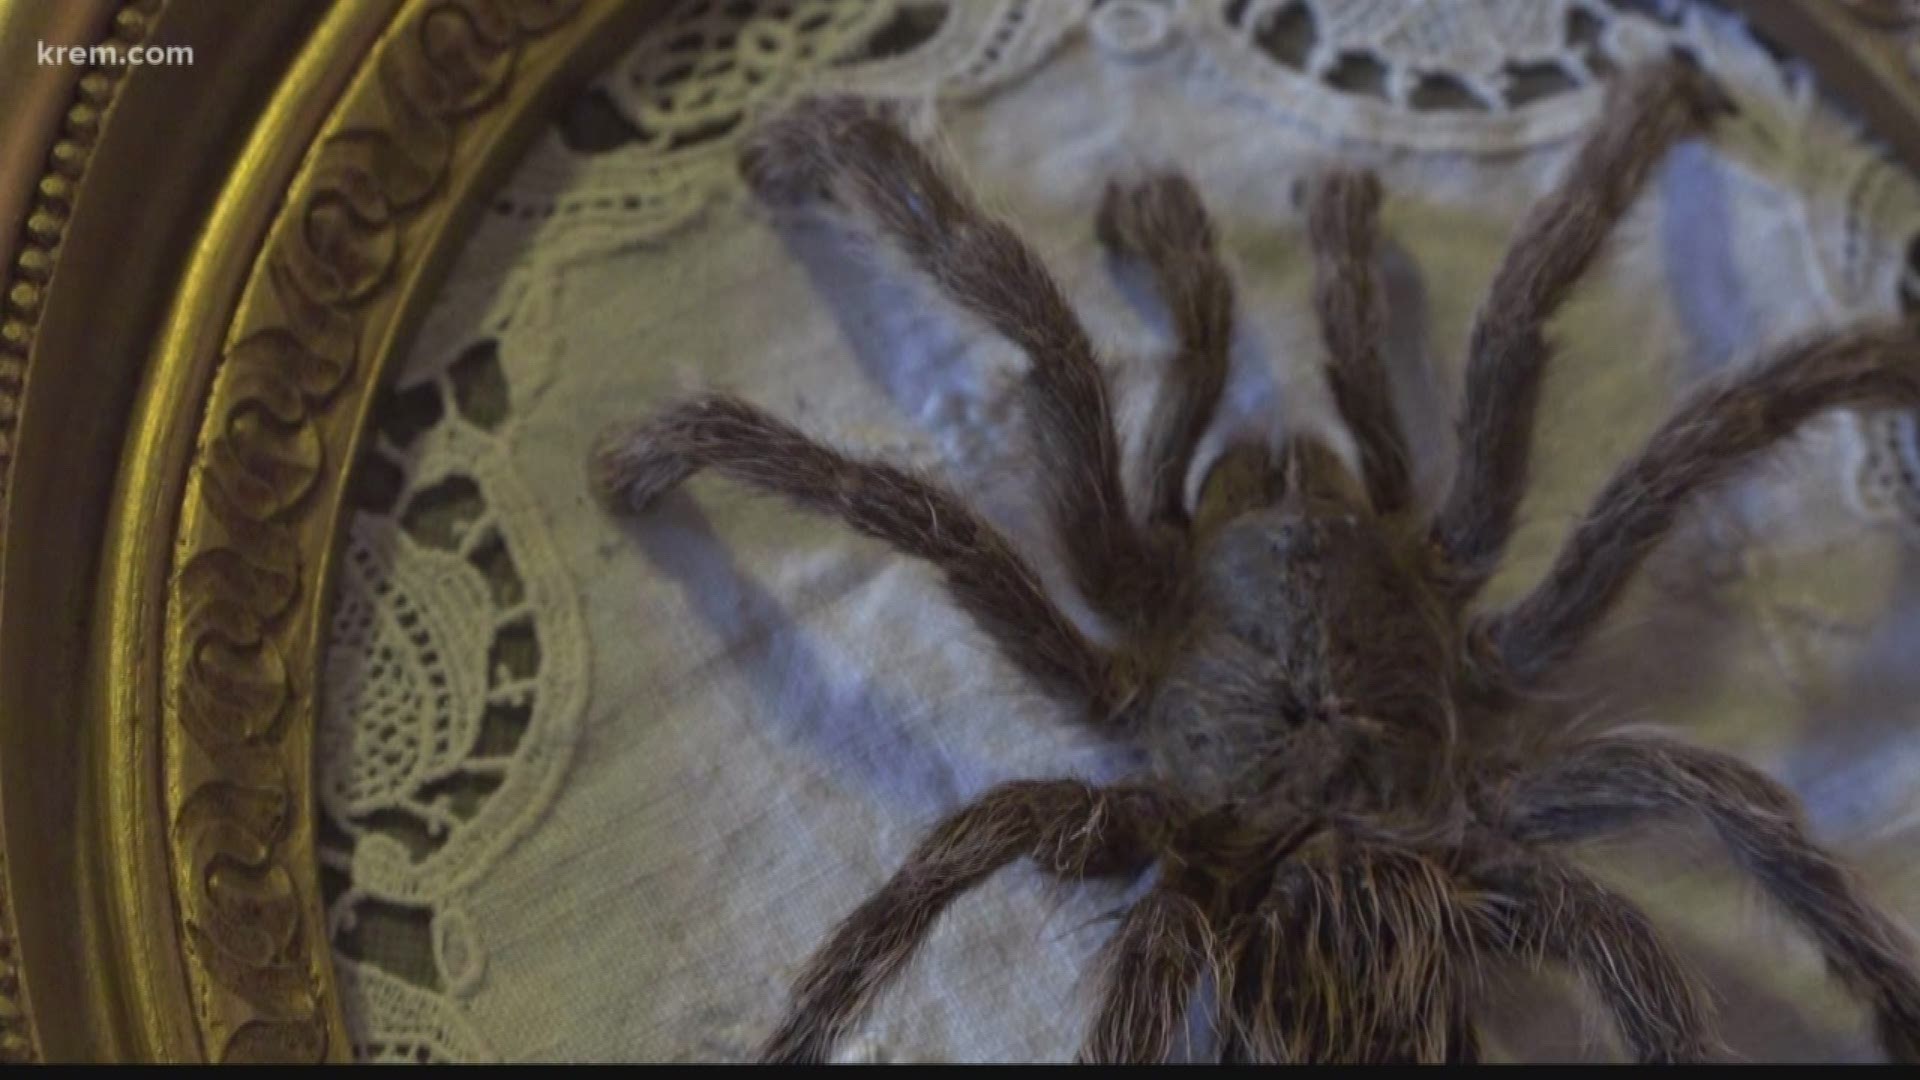 Carly Haney has framed more than 100 spiders in five years. They come from all over the world.